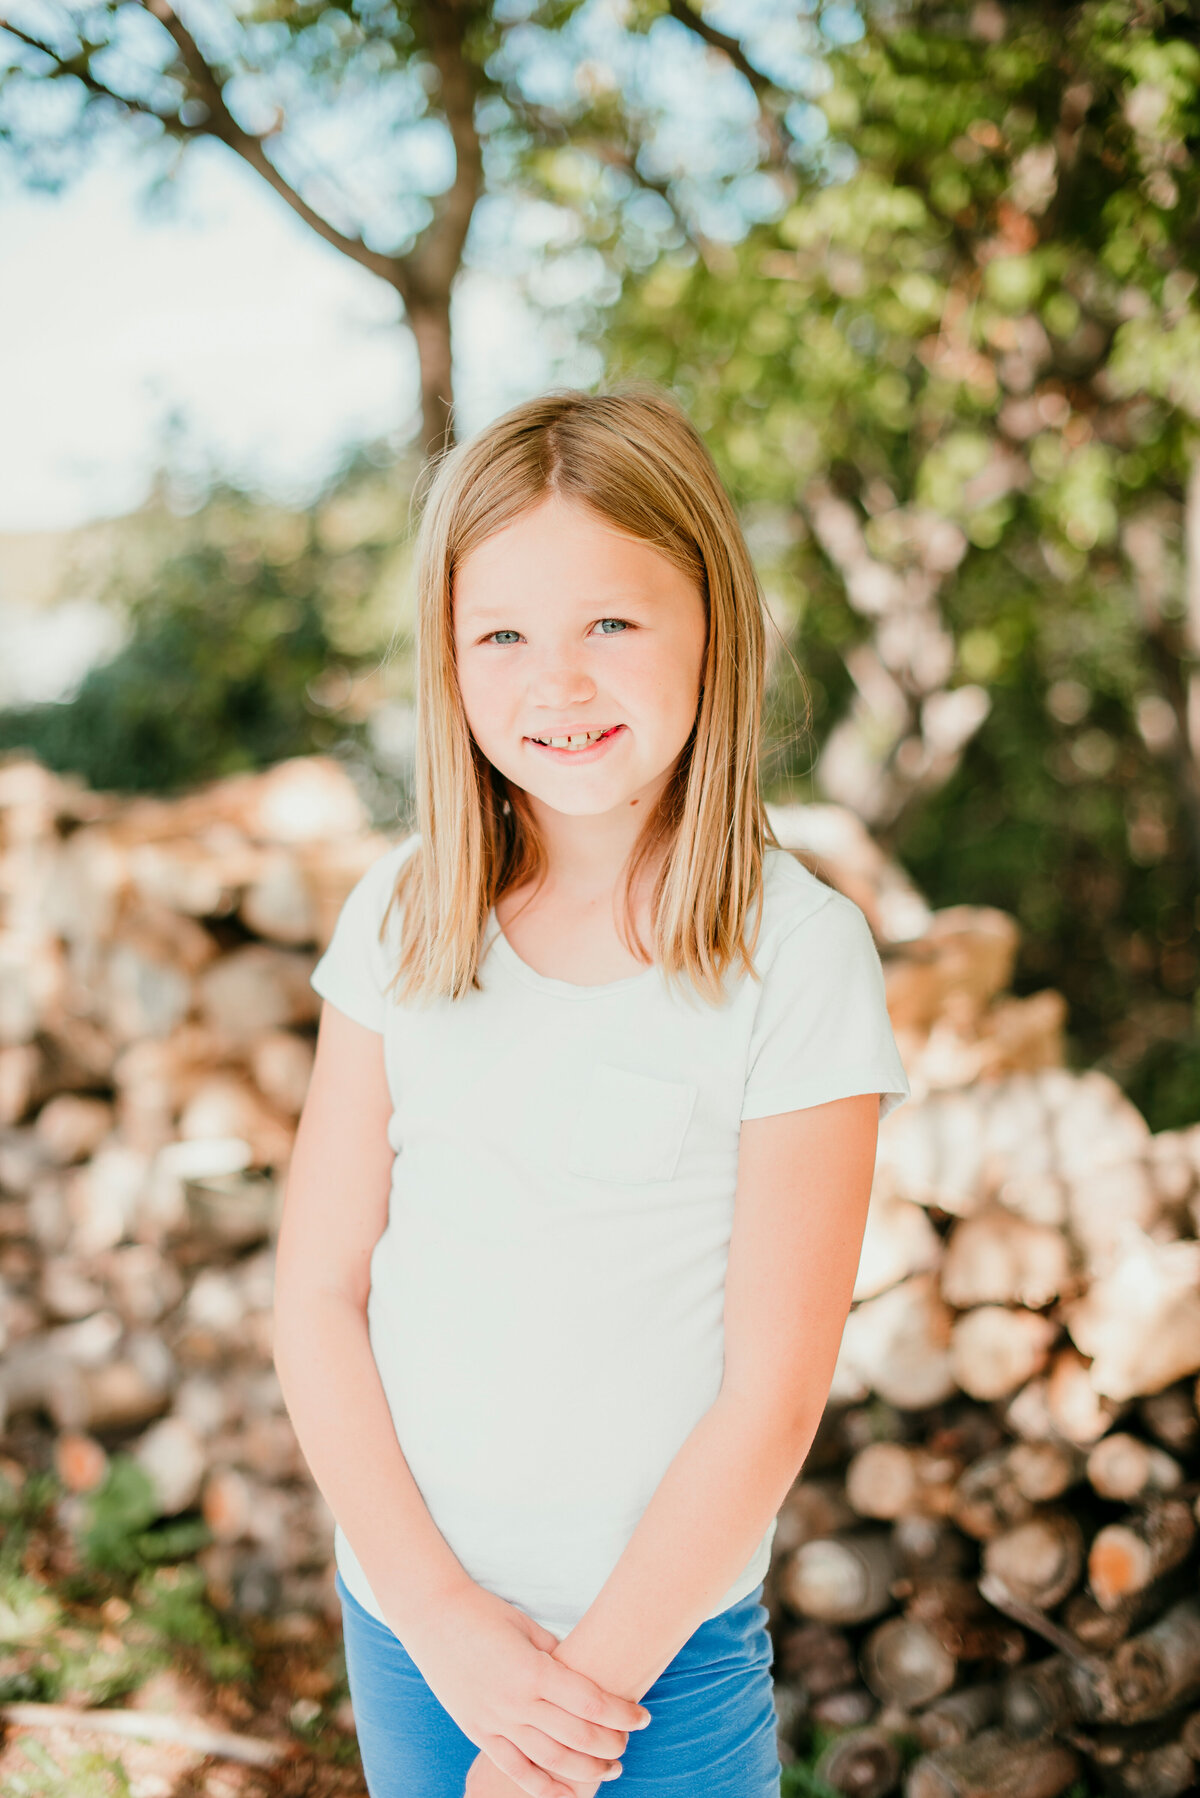 Create cherished memories with our homeschool portraits. Every image is a testament to the warmth and love shared within homeschooling families.